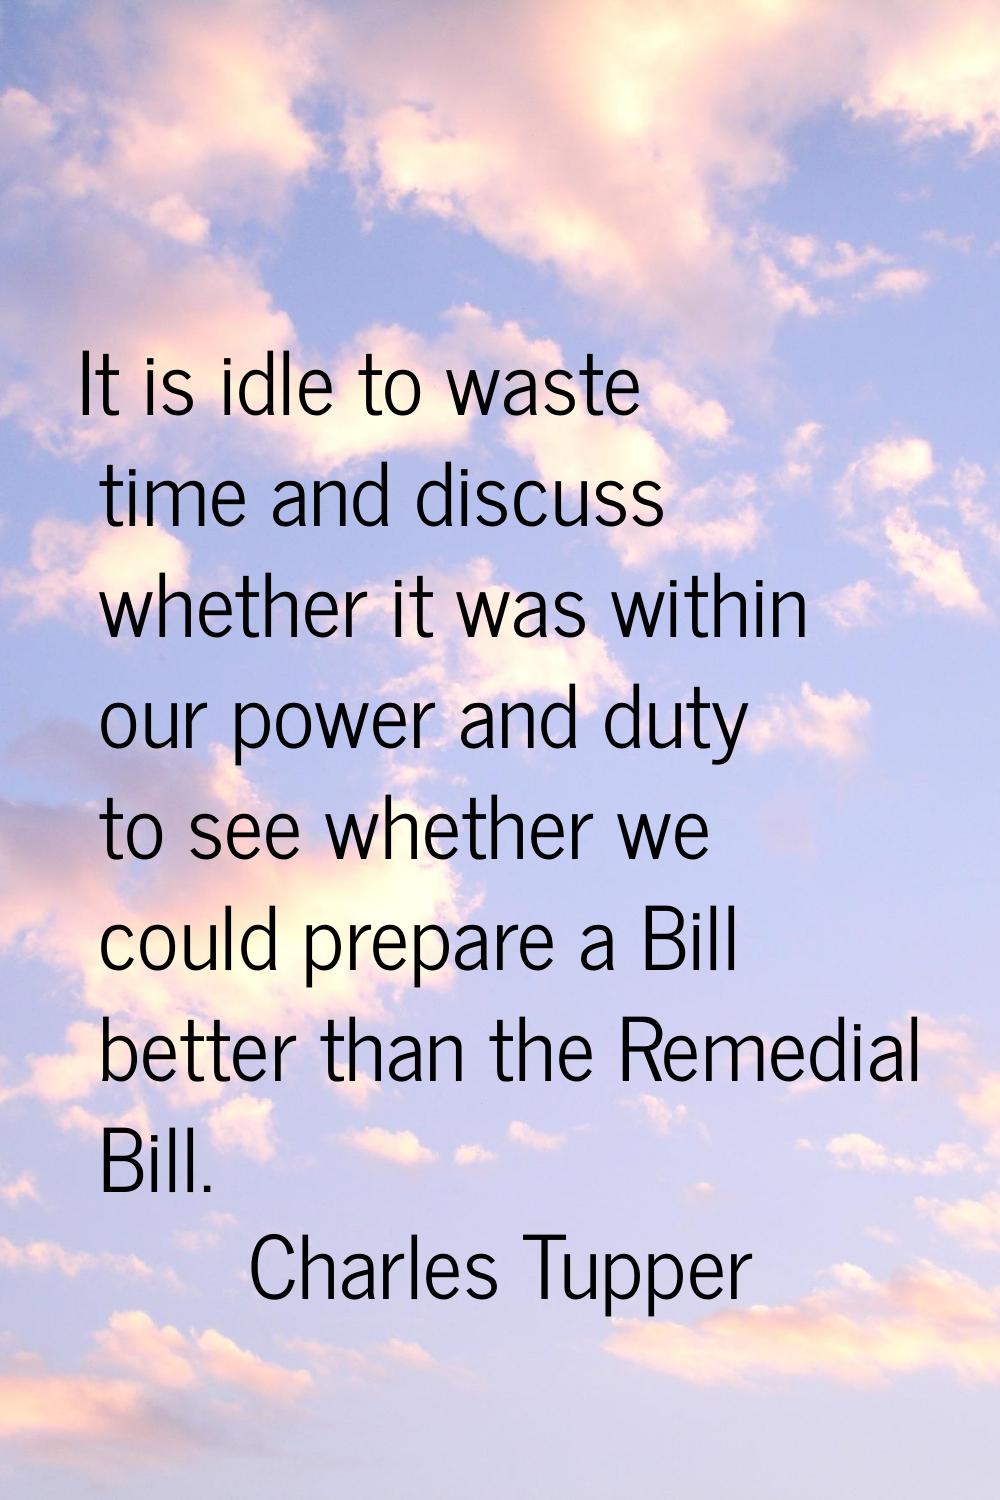 It is idle to waste time and discuss whether it was within our power and duty to see whether we cou